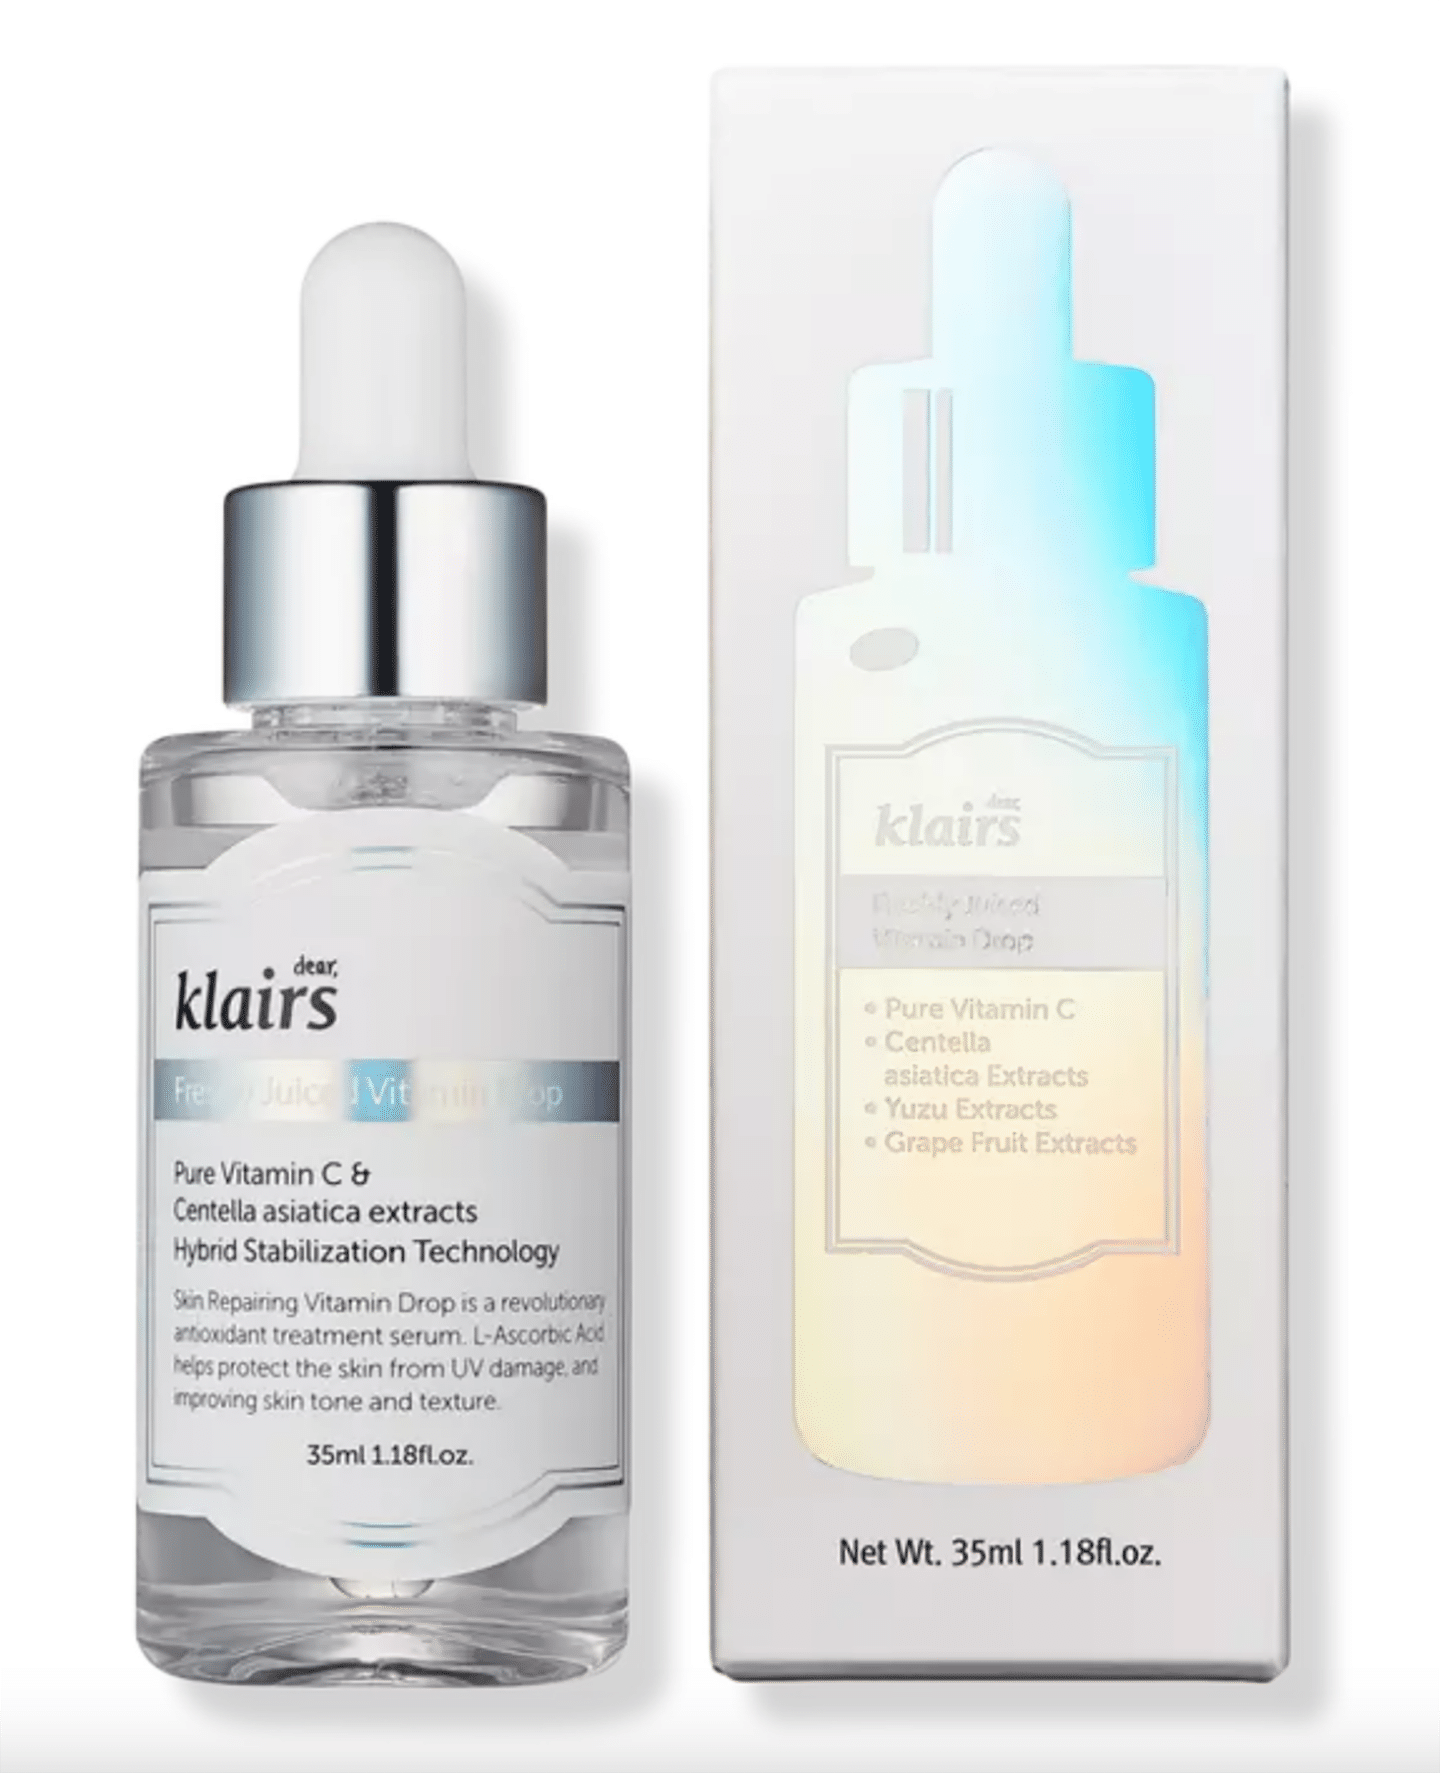 Top Korean Vitamin C serums, by beauty blogger What The Fab